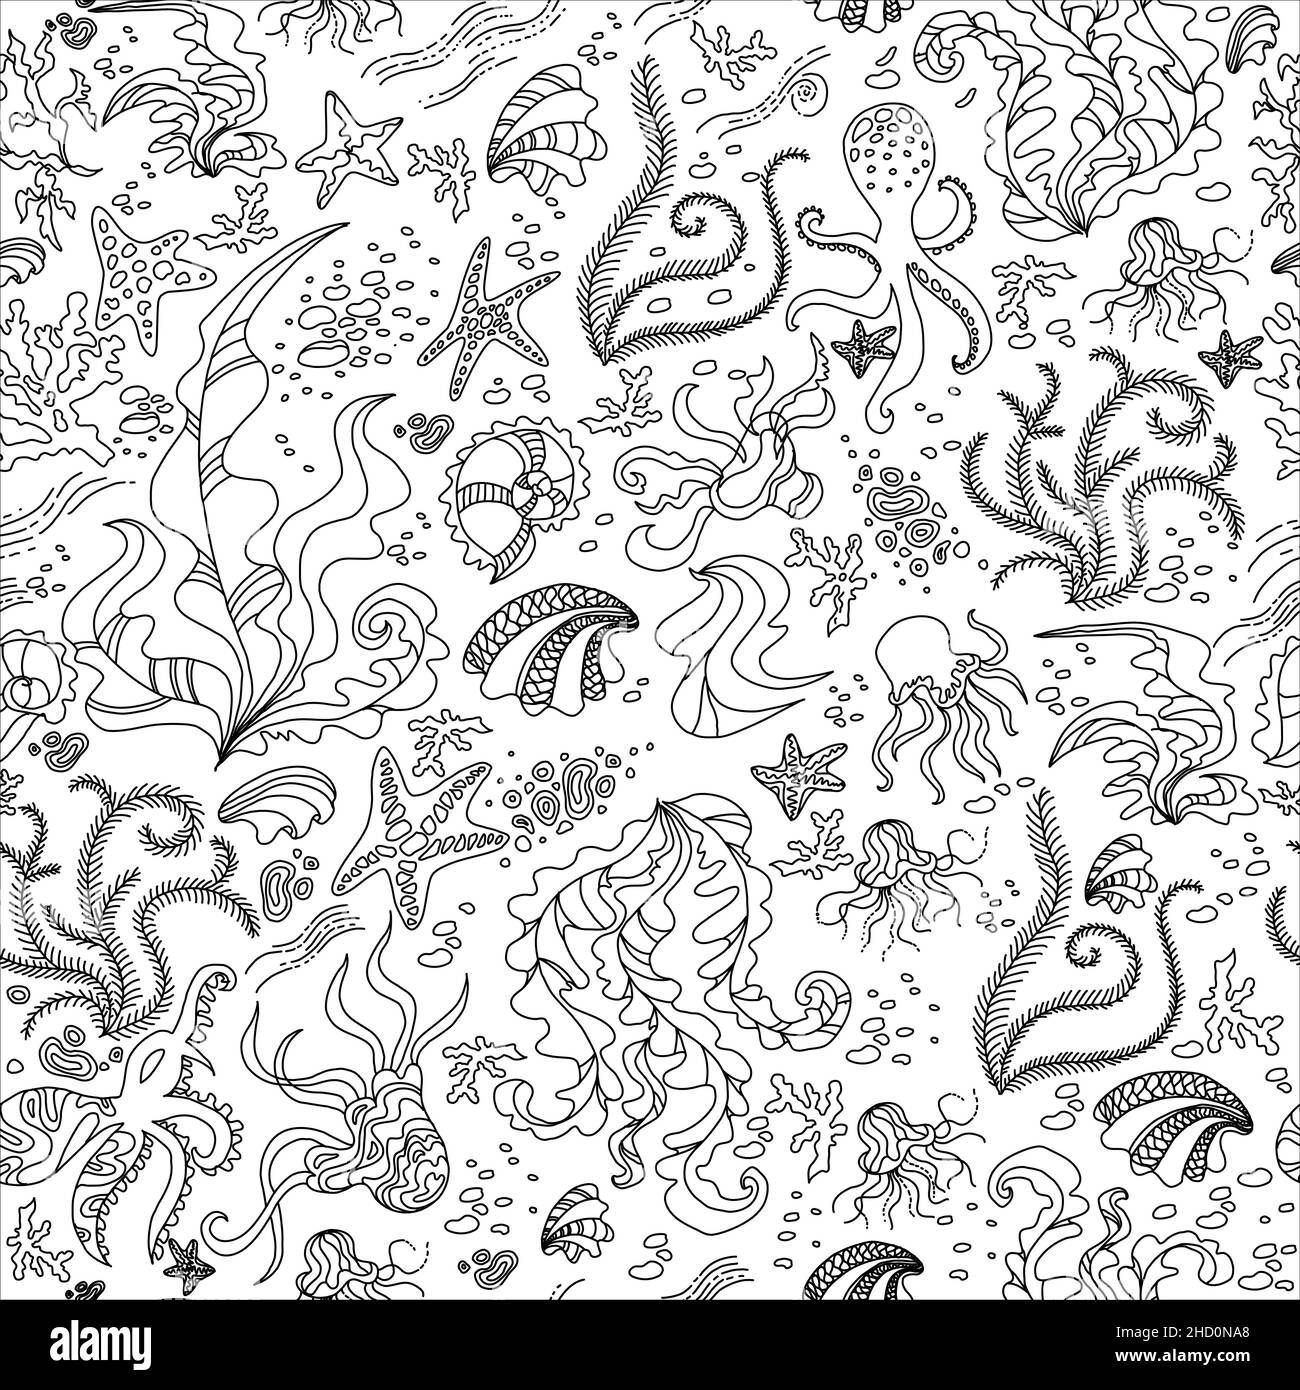 Seamless pattern with Underwater doodle illustration Stock Vector